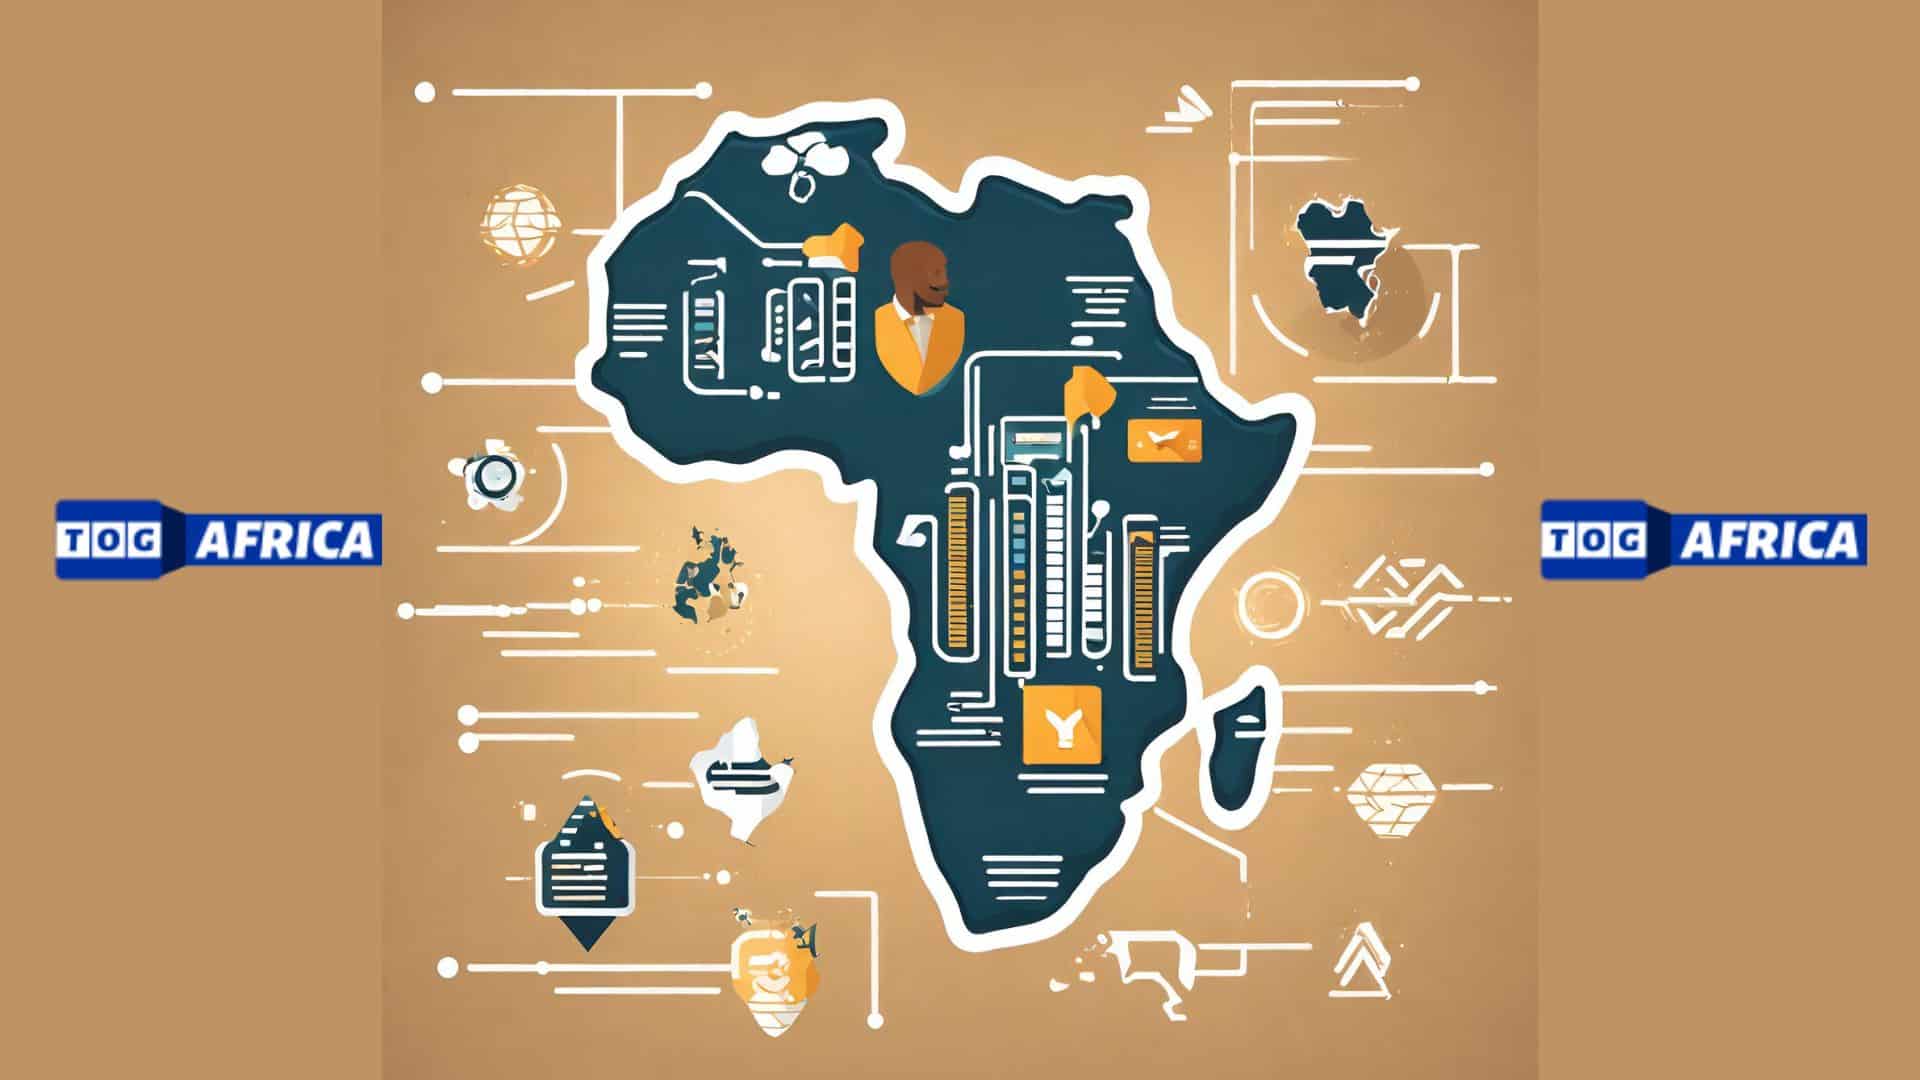 Paystack, Virtual Accounts, Wallet Systems, Online Transactions, TOG Africa, Web Solutions, Payment Integration, Digital Payments, Africa FinTech